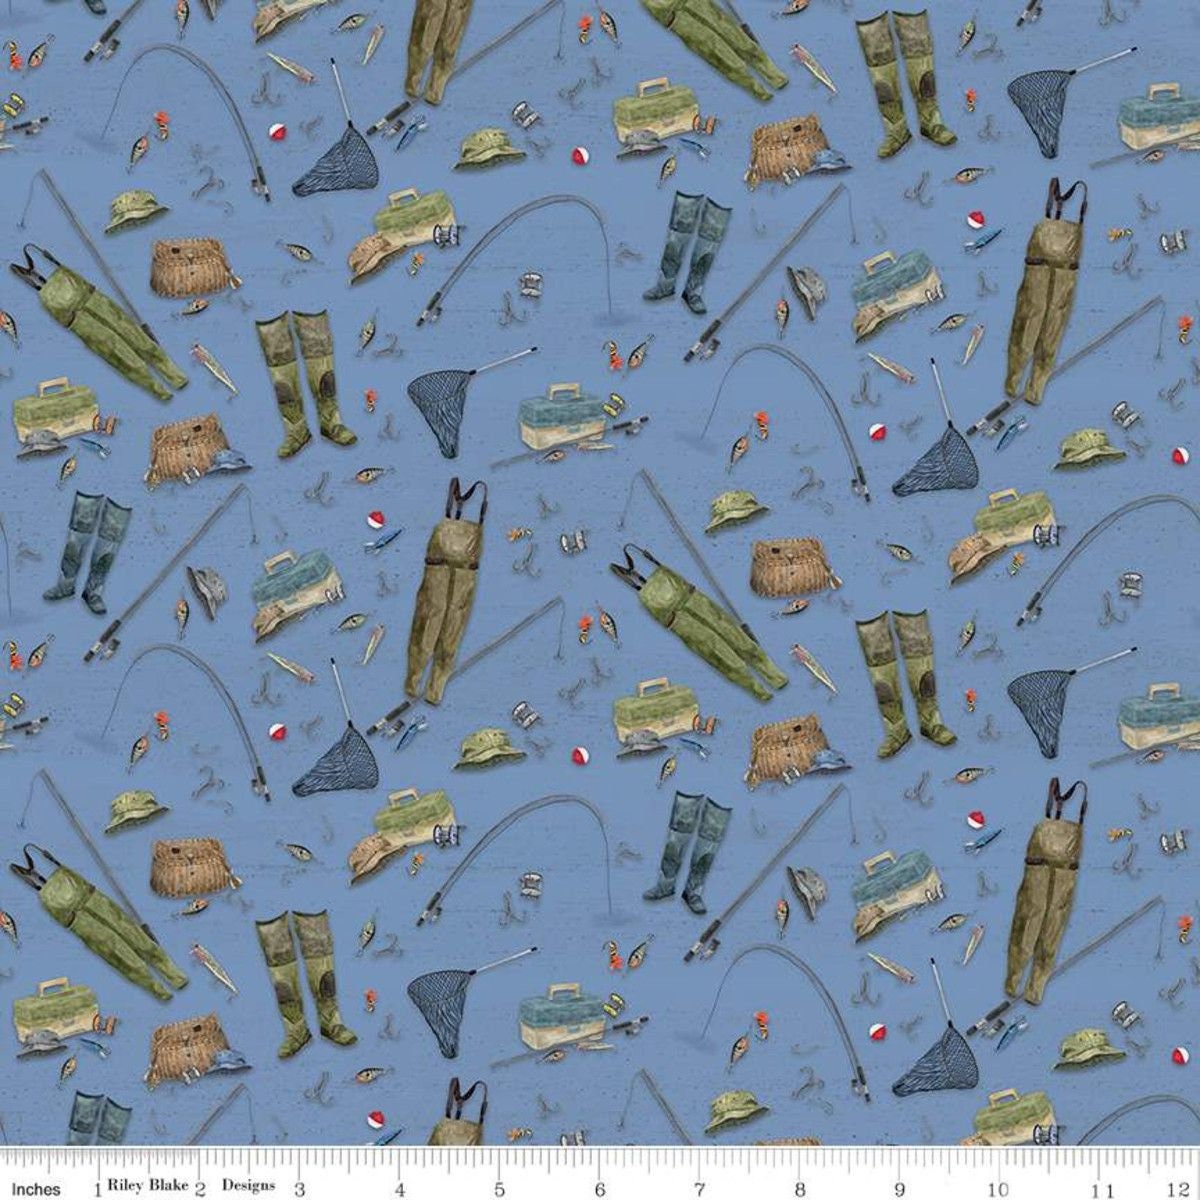 At The Lake by Tara Reed Gear Blue C10551-BLUE Cotton Woven Fabric